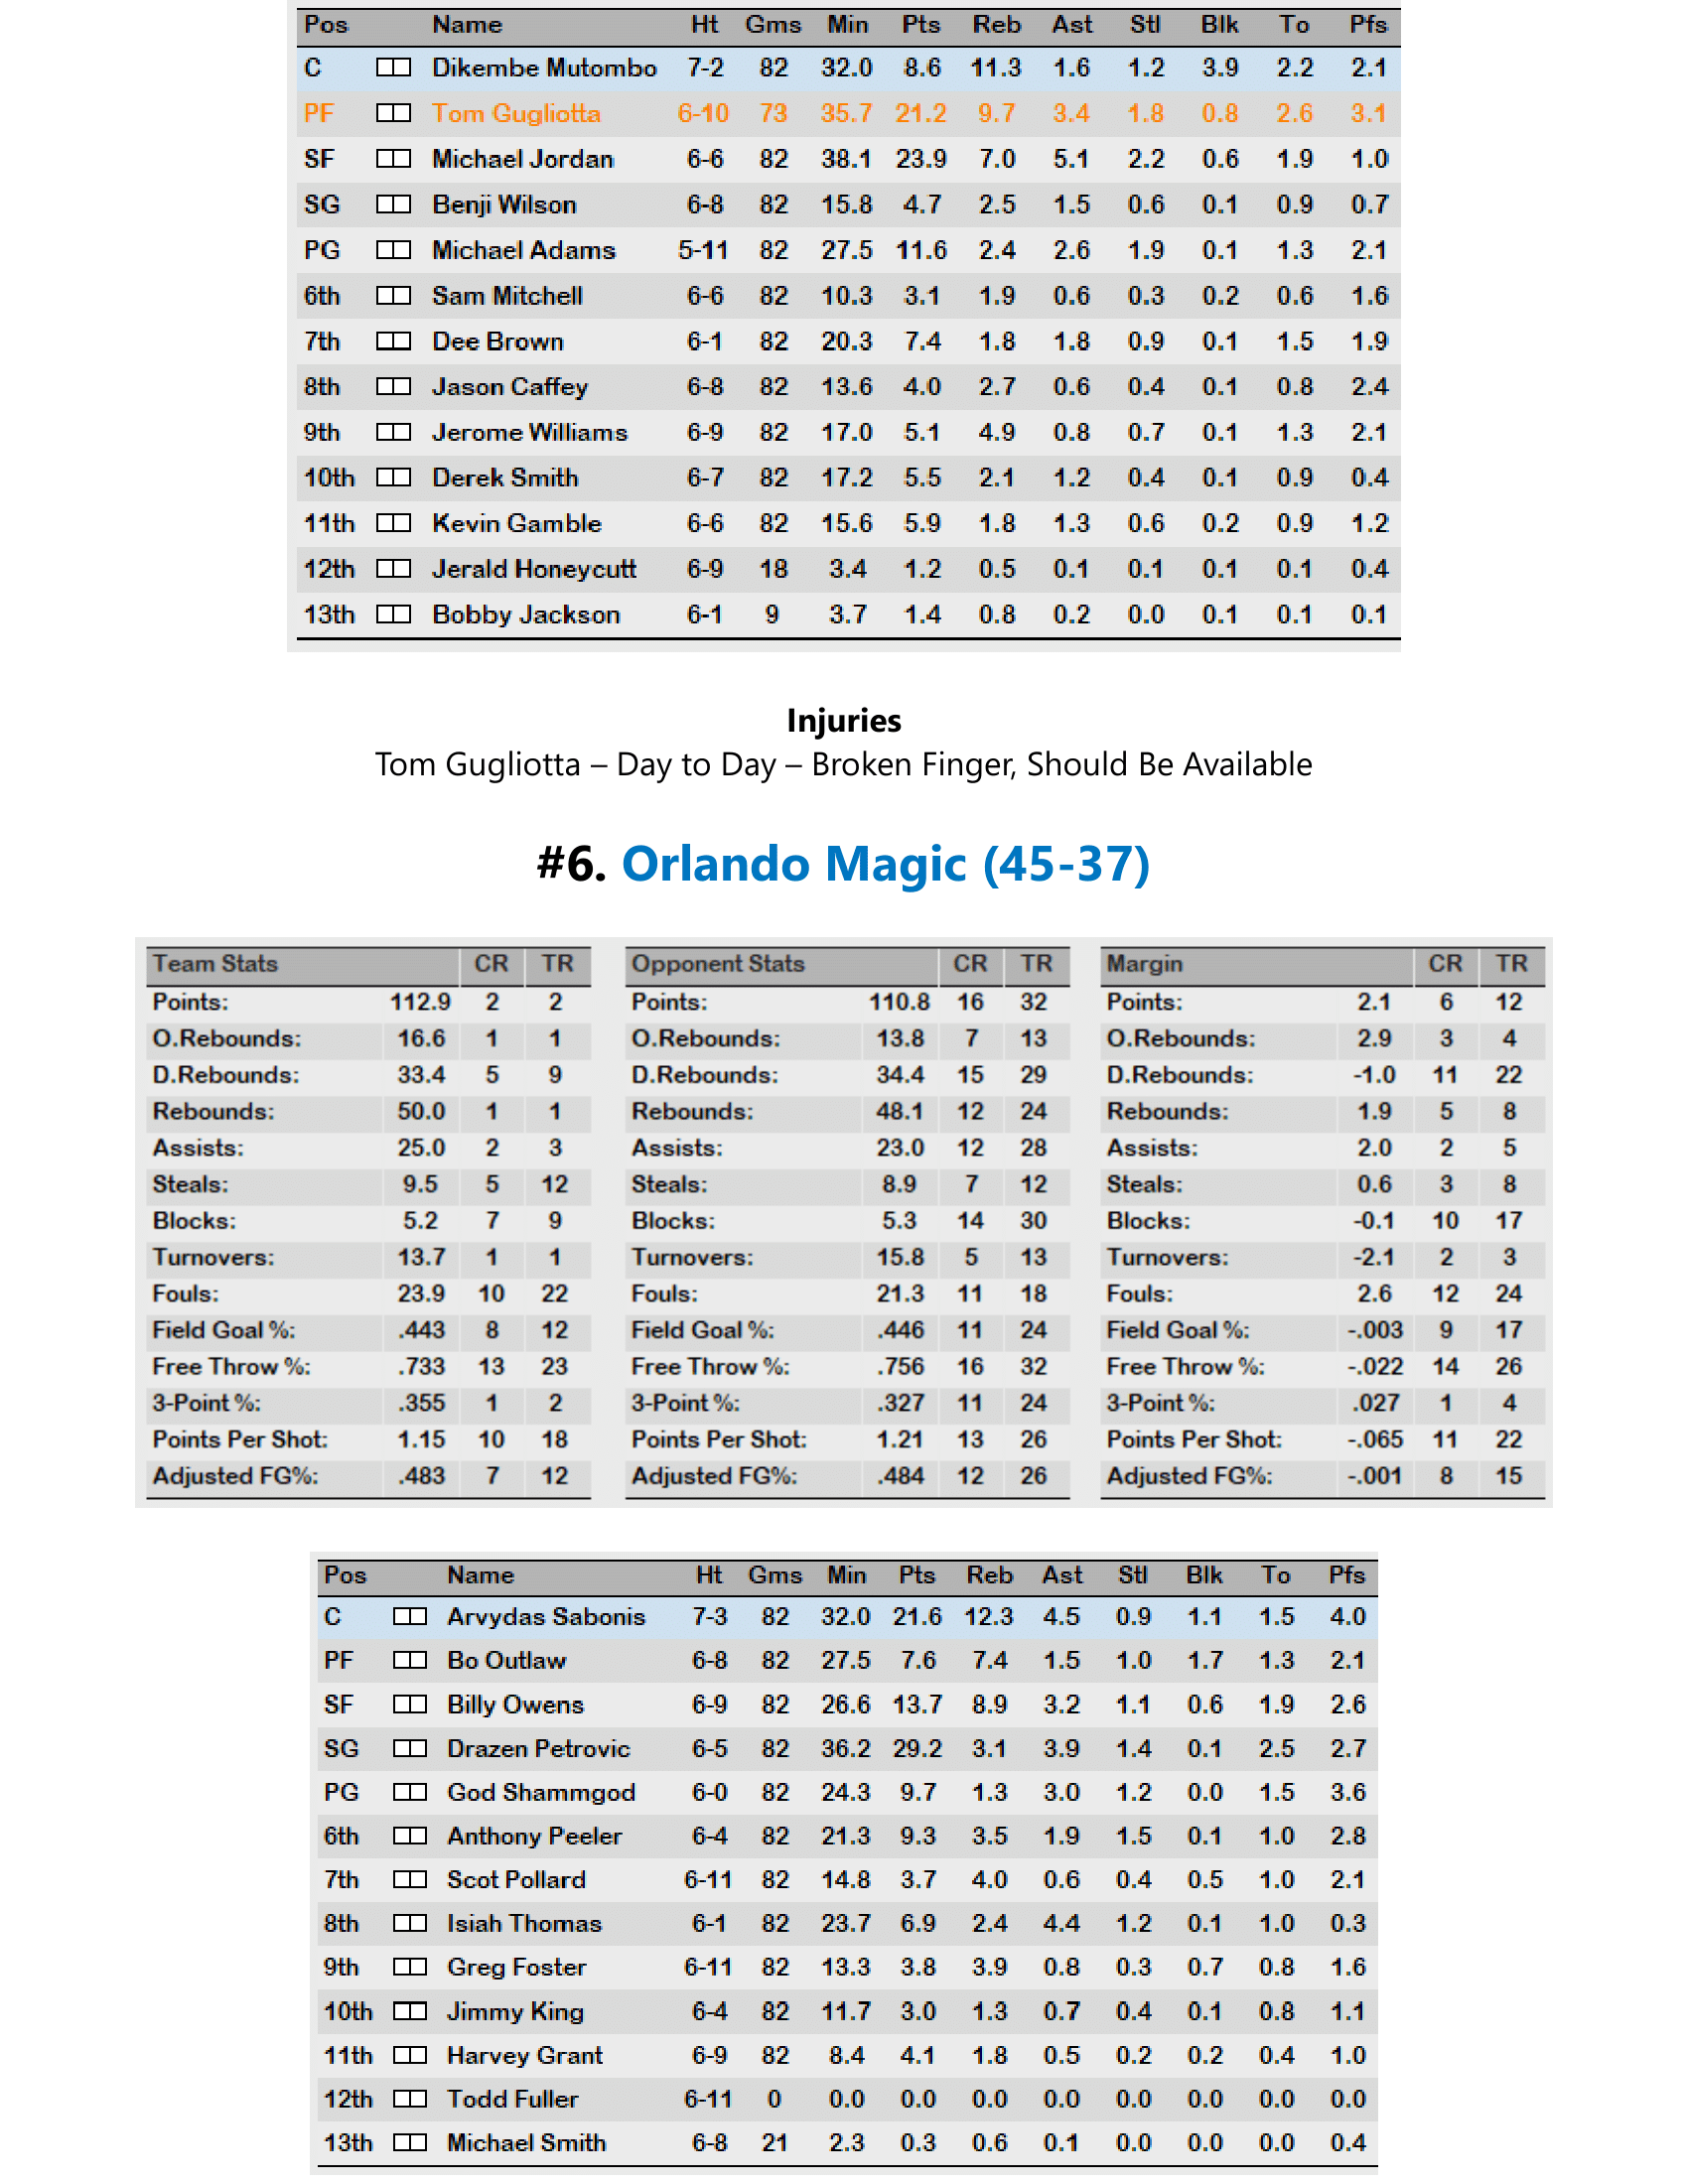 97-98-Part-3-Playoff-Preview-11.png